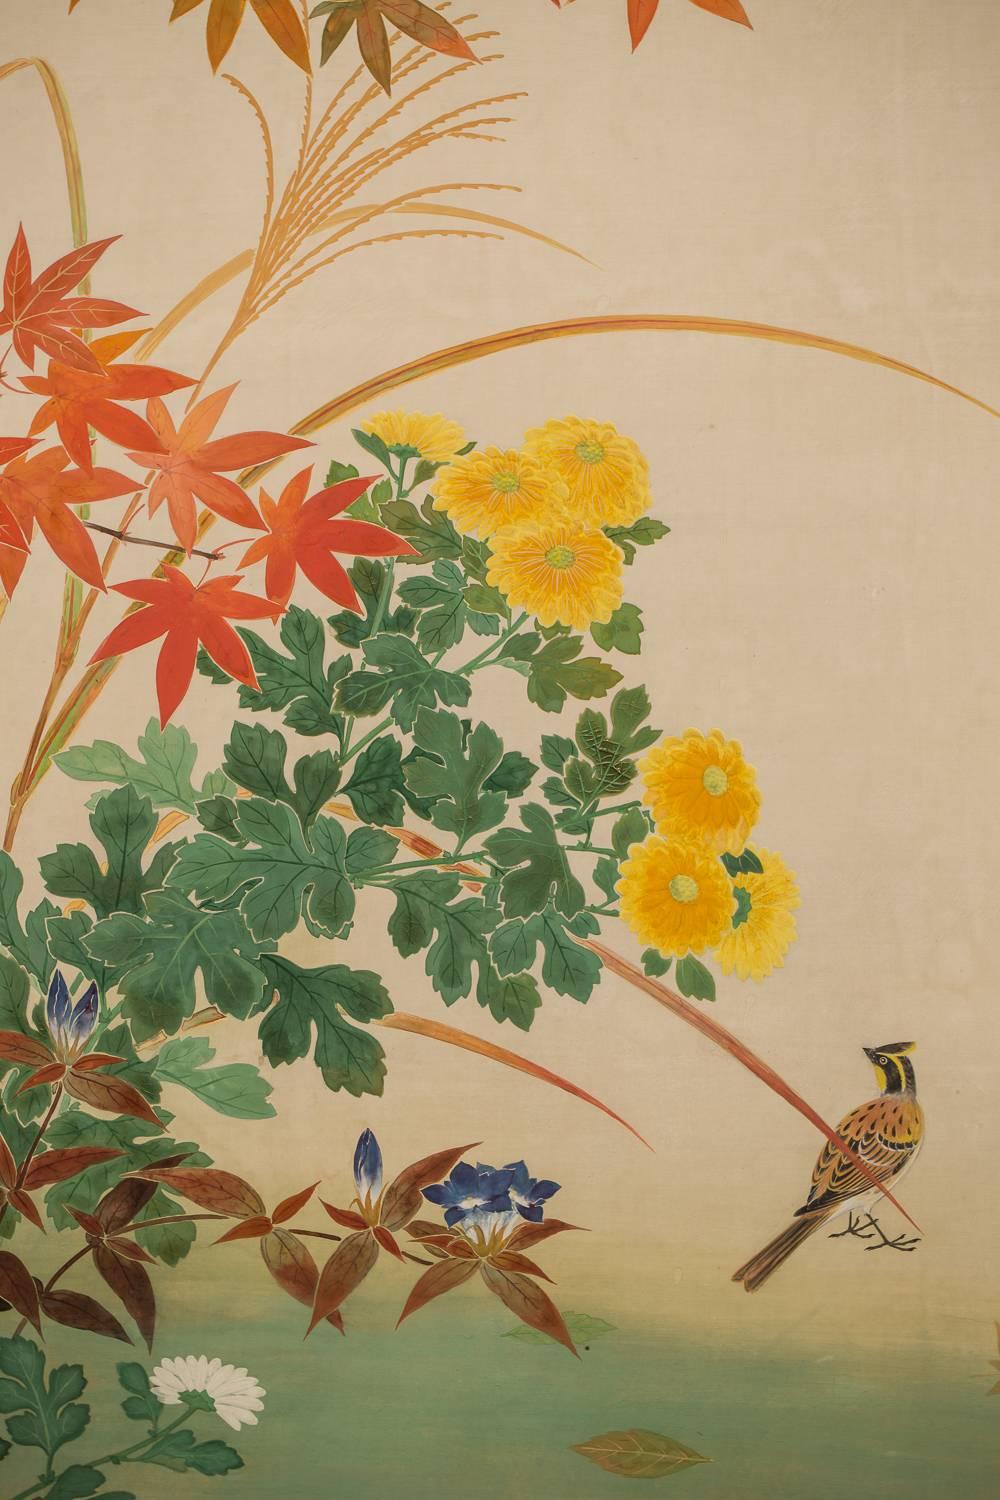 Japanese two panel screen, ‘Early Autumn Maple and Flowers’
mineral pigments on silk, with signature and seal on lower left: Reiro

Okumura Reiro (1901-1984), born in Tokyo. His young name was Suteo, he became a student of Katayama Nanpu. He